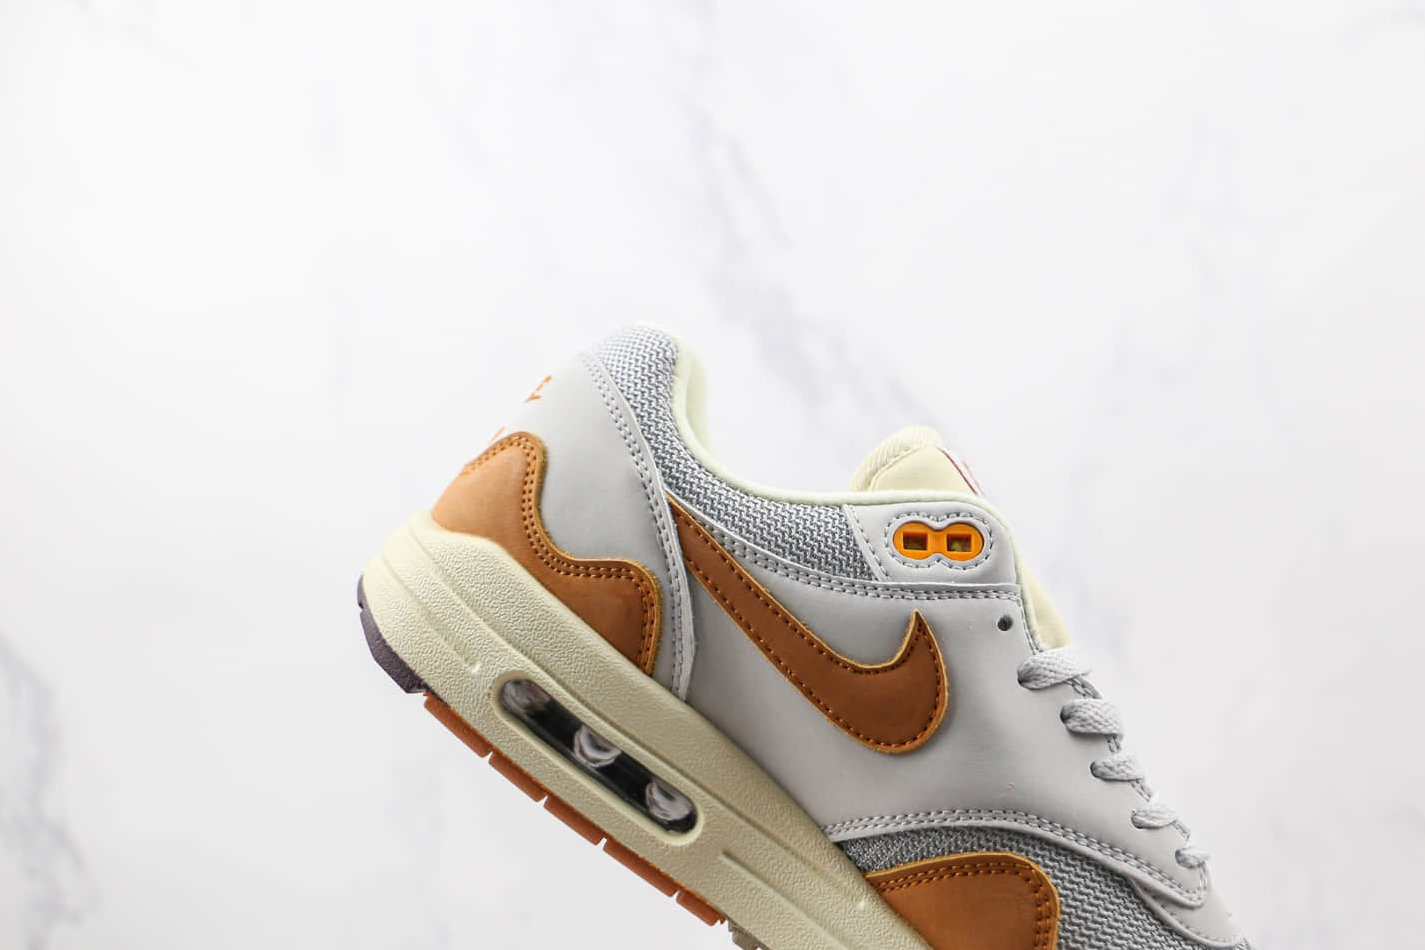 Nike Patta x Air Max 1 'Monarch' DH1348-001 - Exclusive Collaboration for Sneaker Enthusiasts!